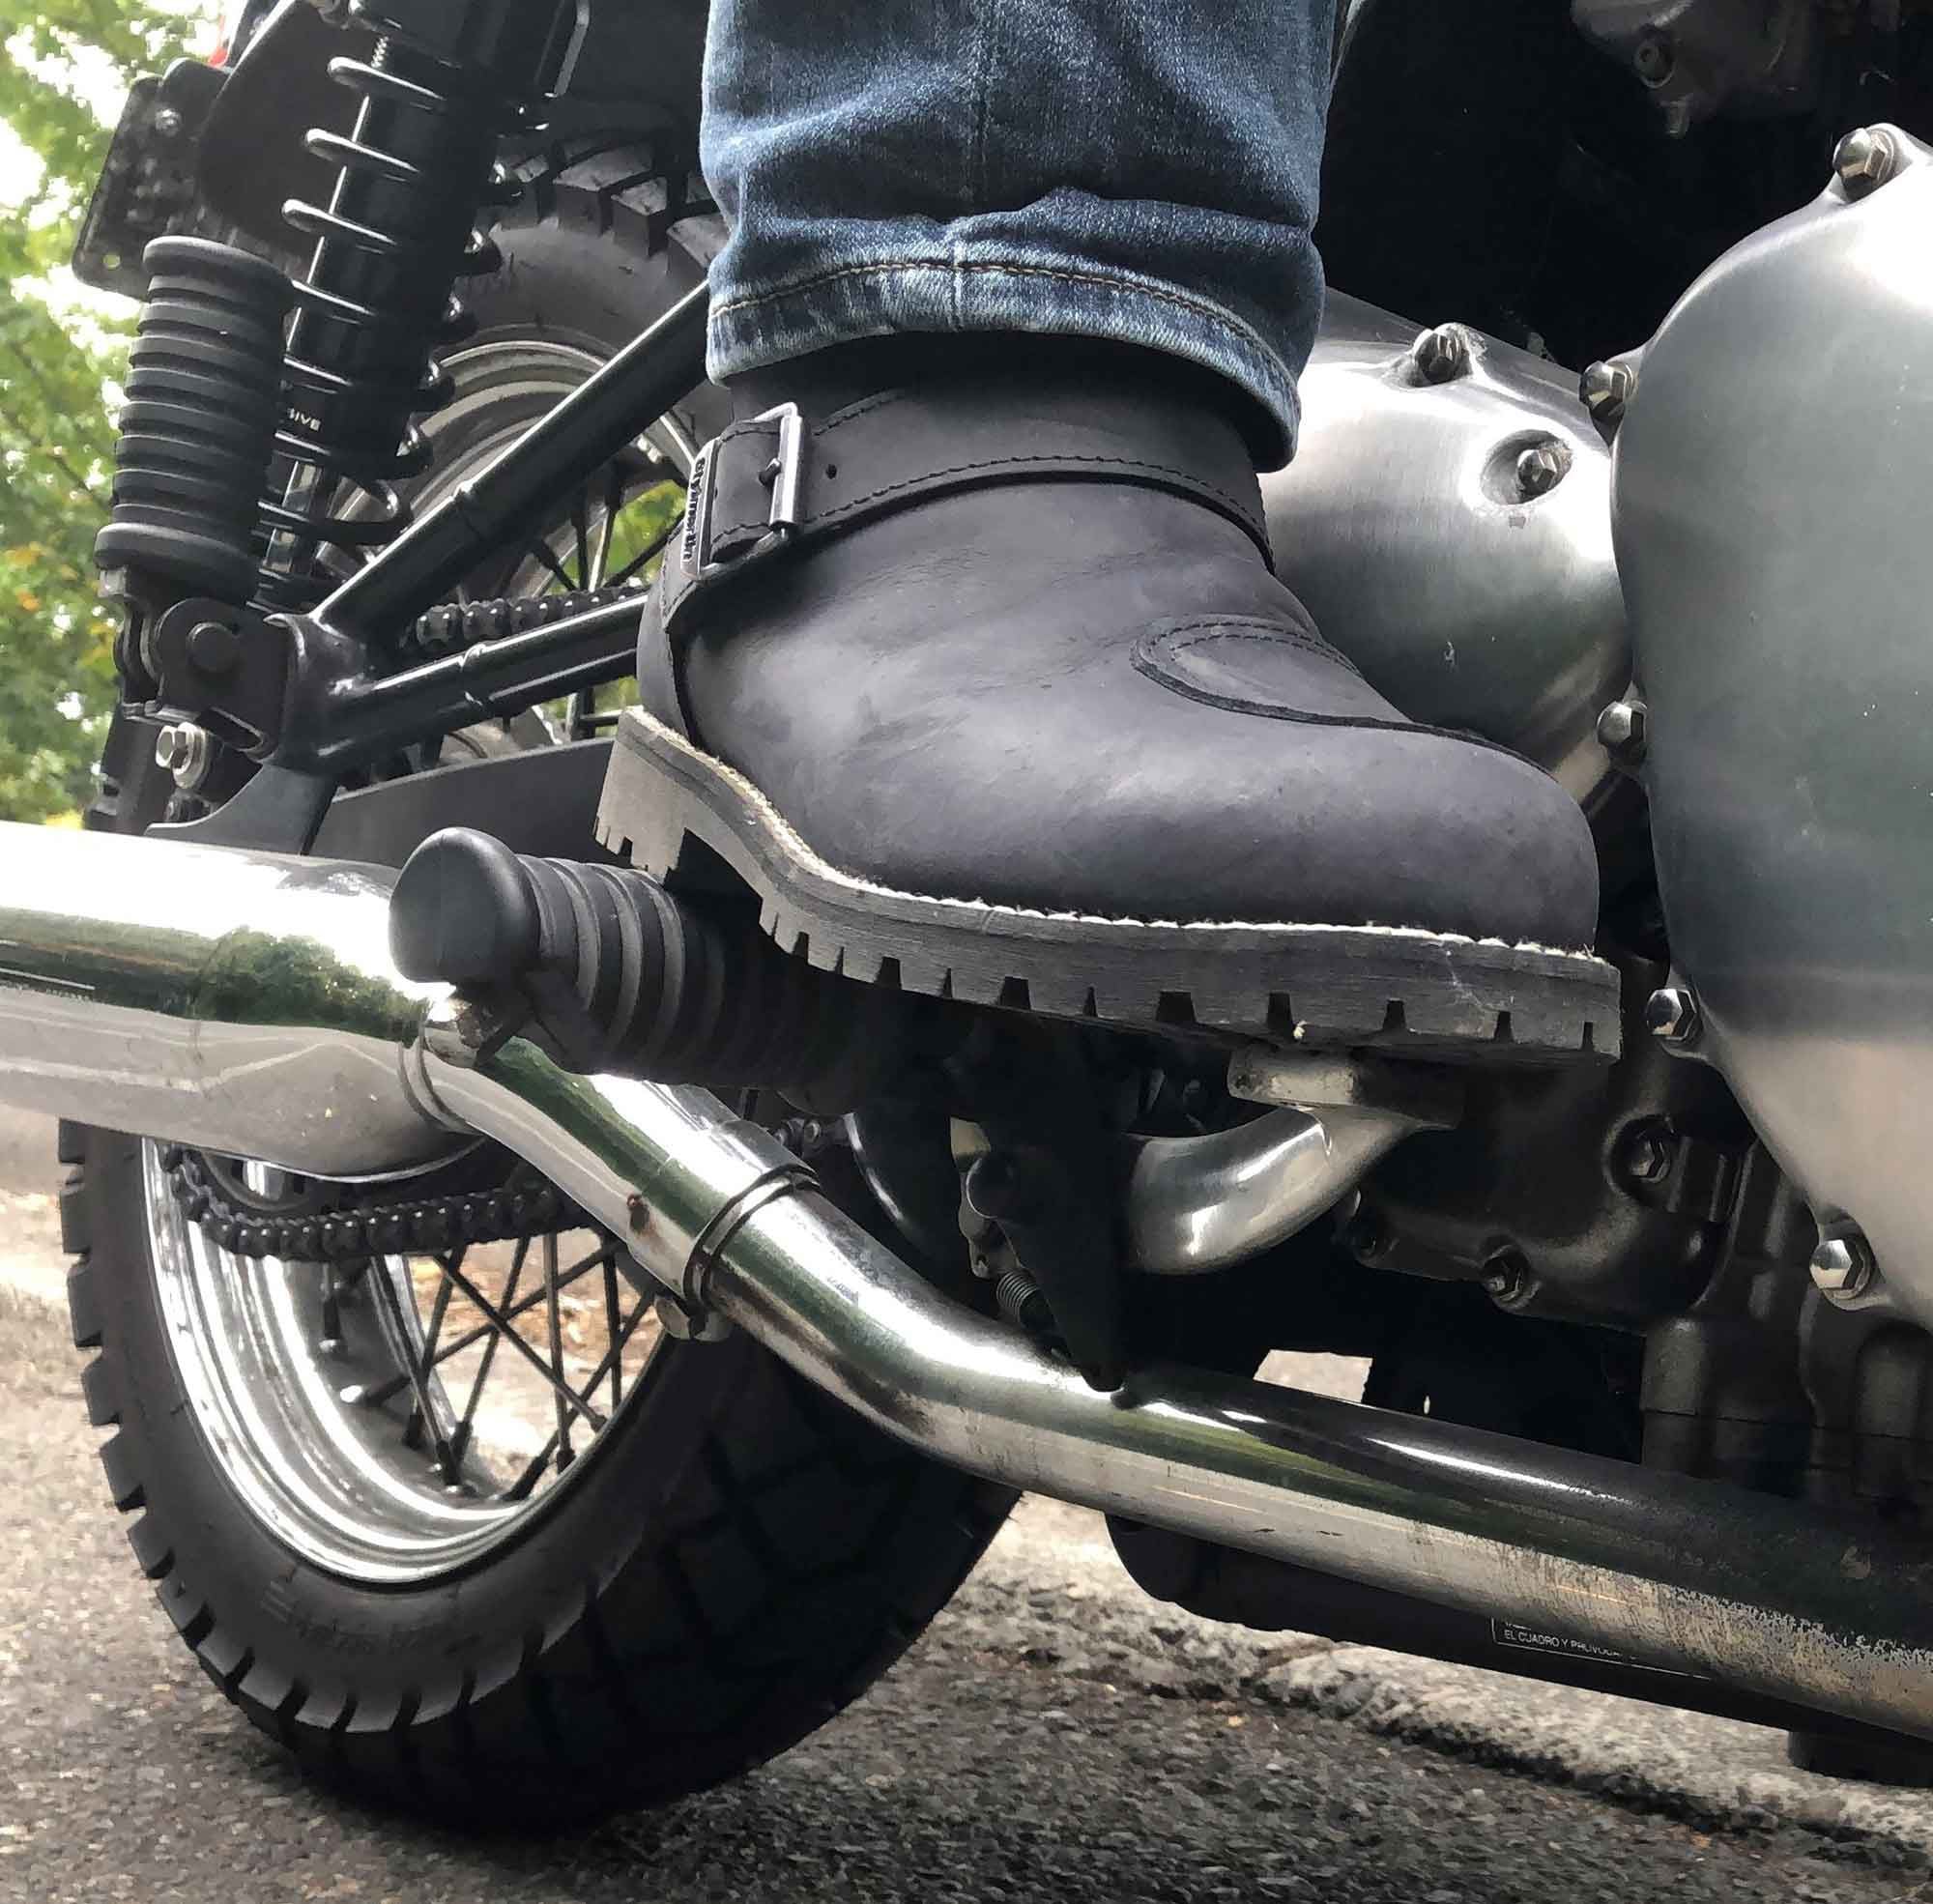 Classic engineer/moto boot cues include a heavy-duty sole and metal buckle at the ankle.